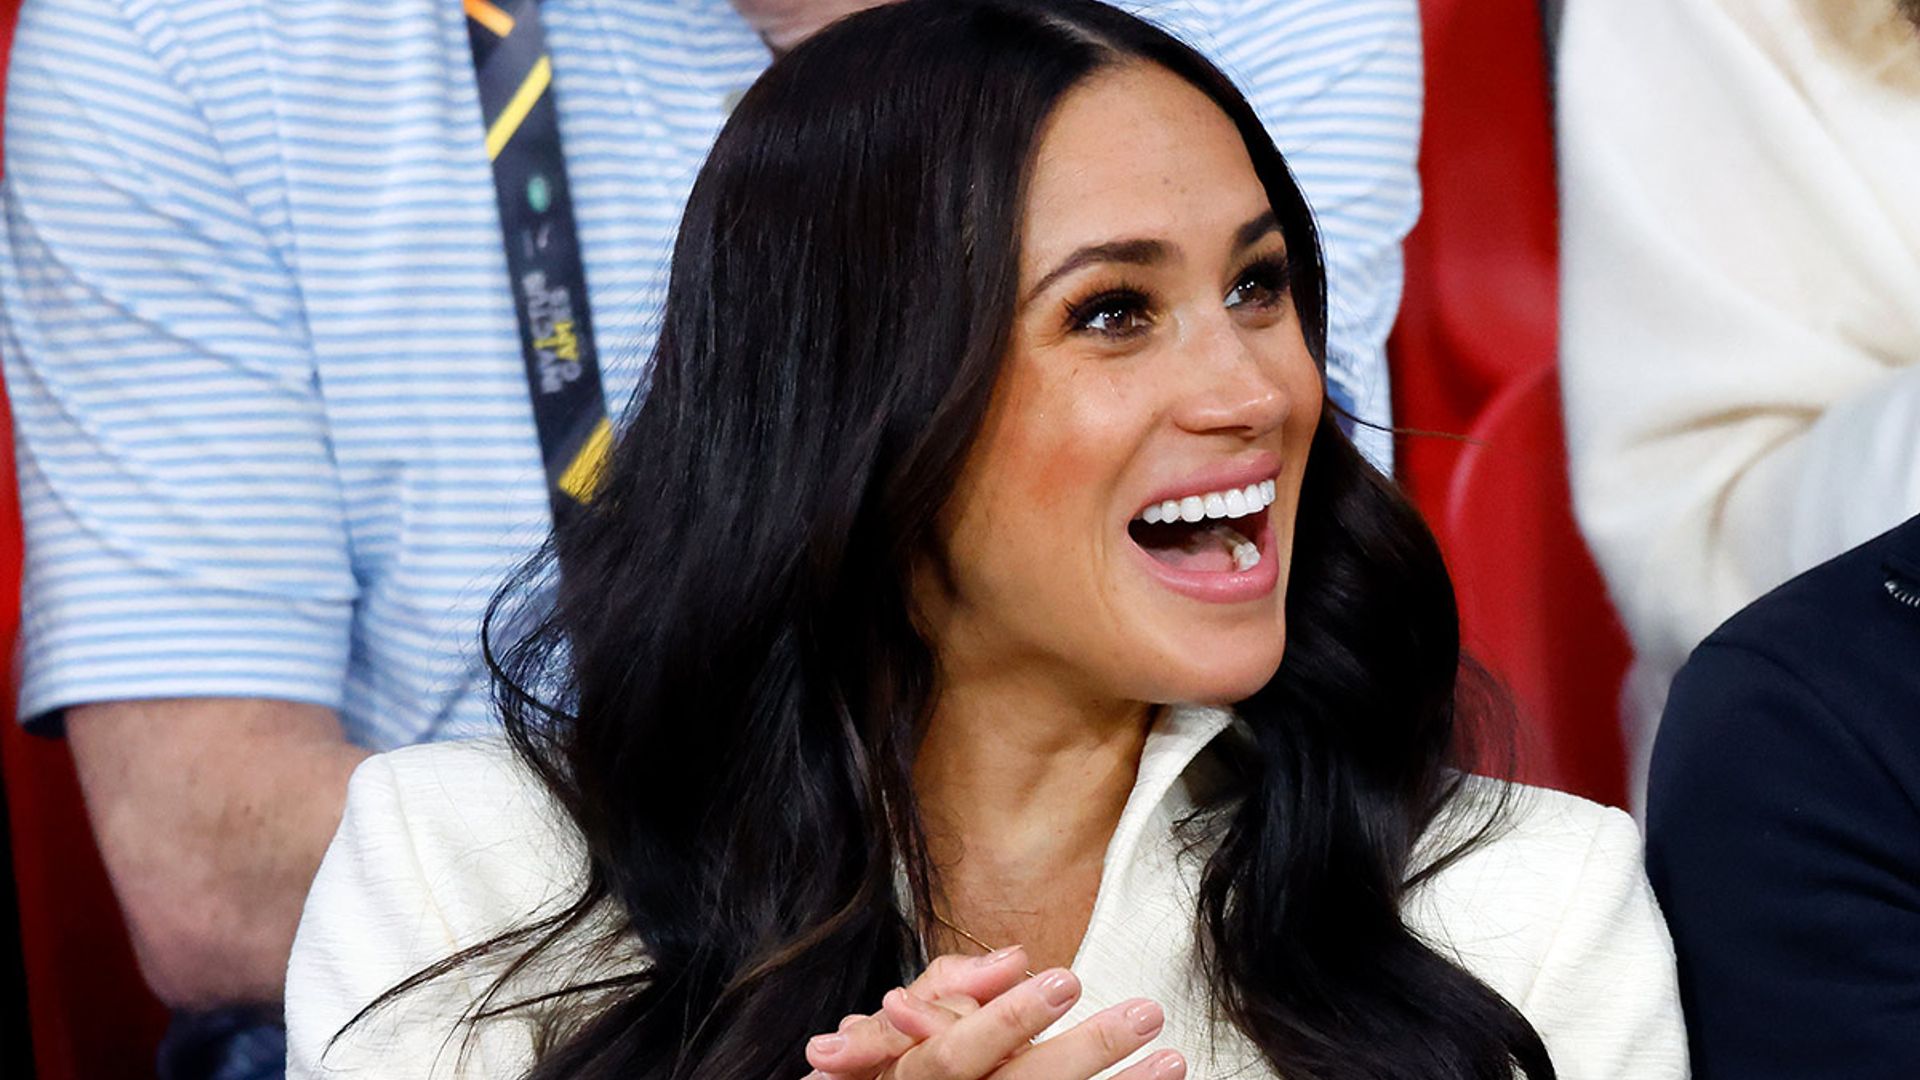 Meghan Markle has 'grown in confidence' away from Prince Harry – body language expert reveals all thumbnail